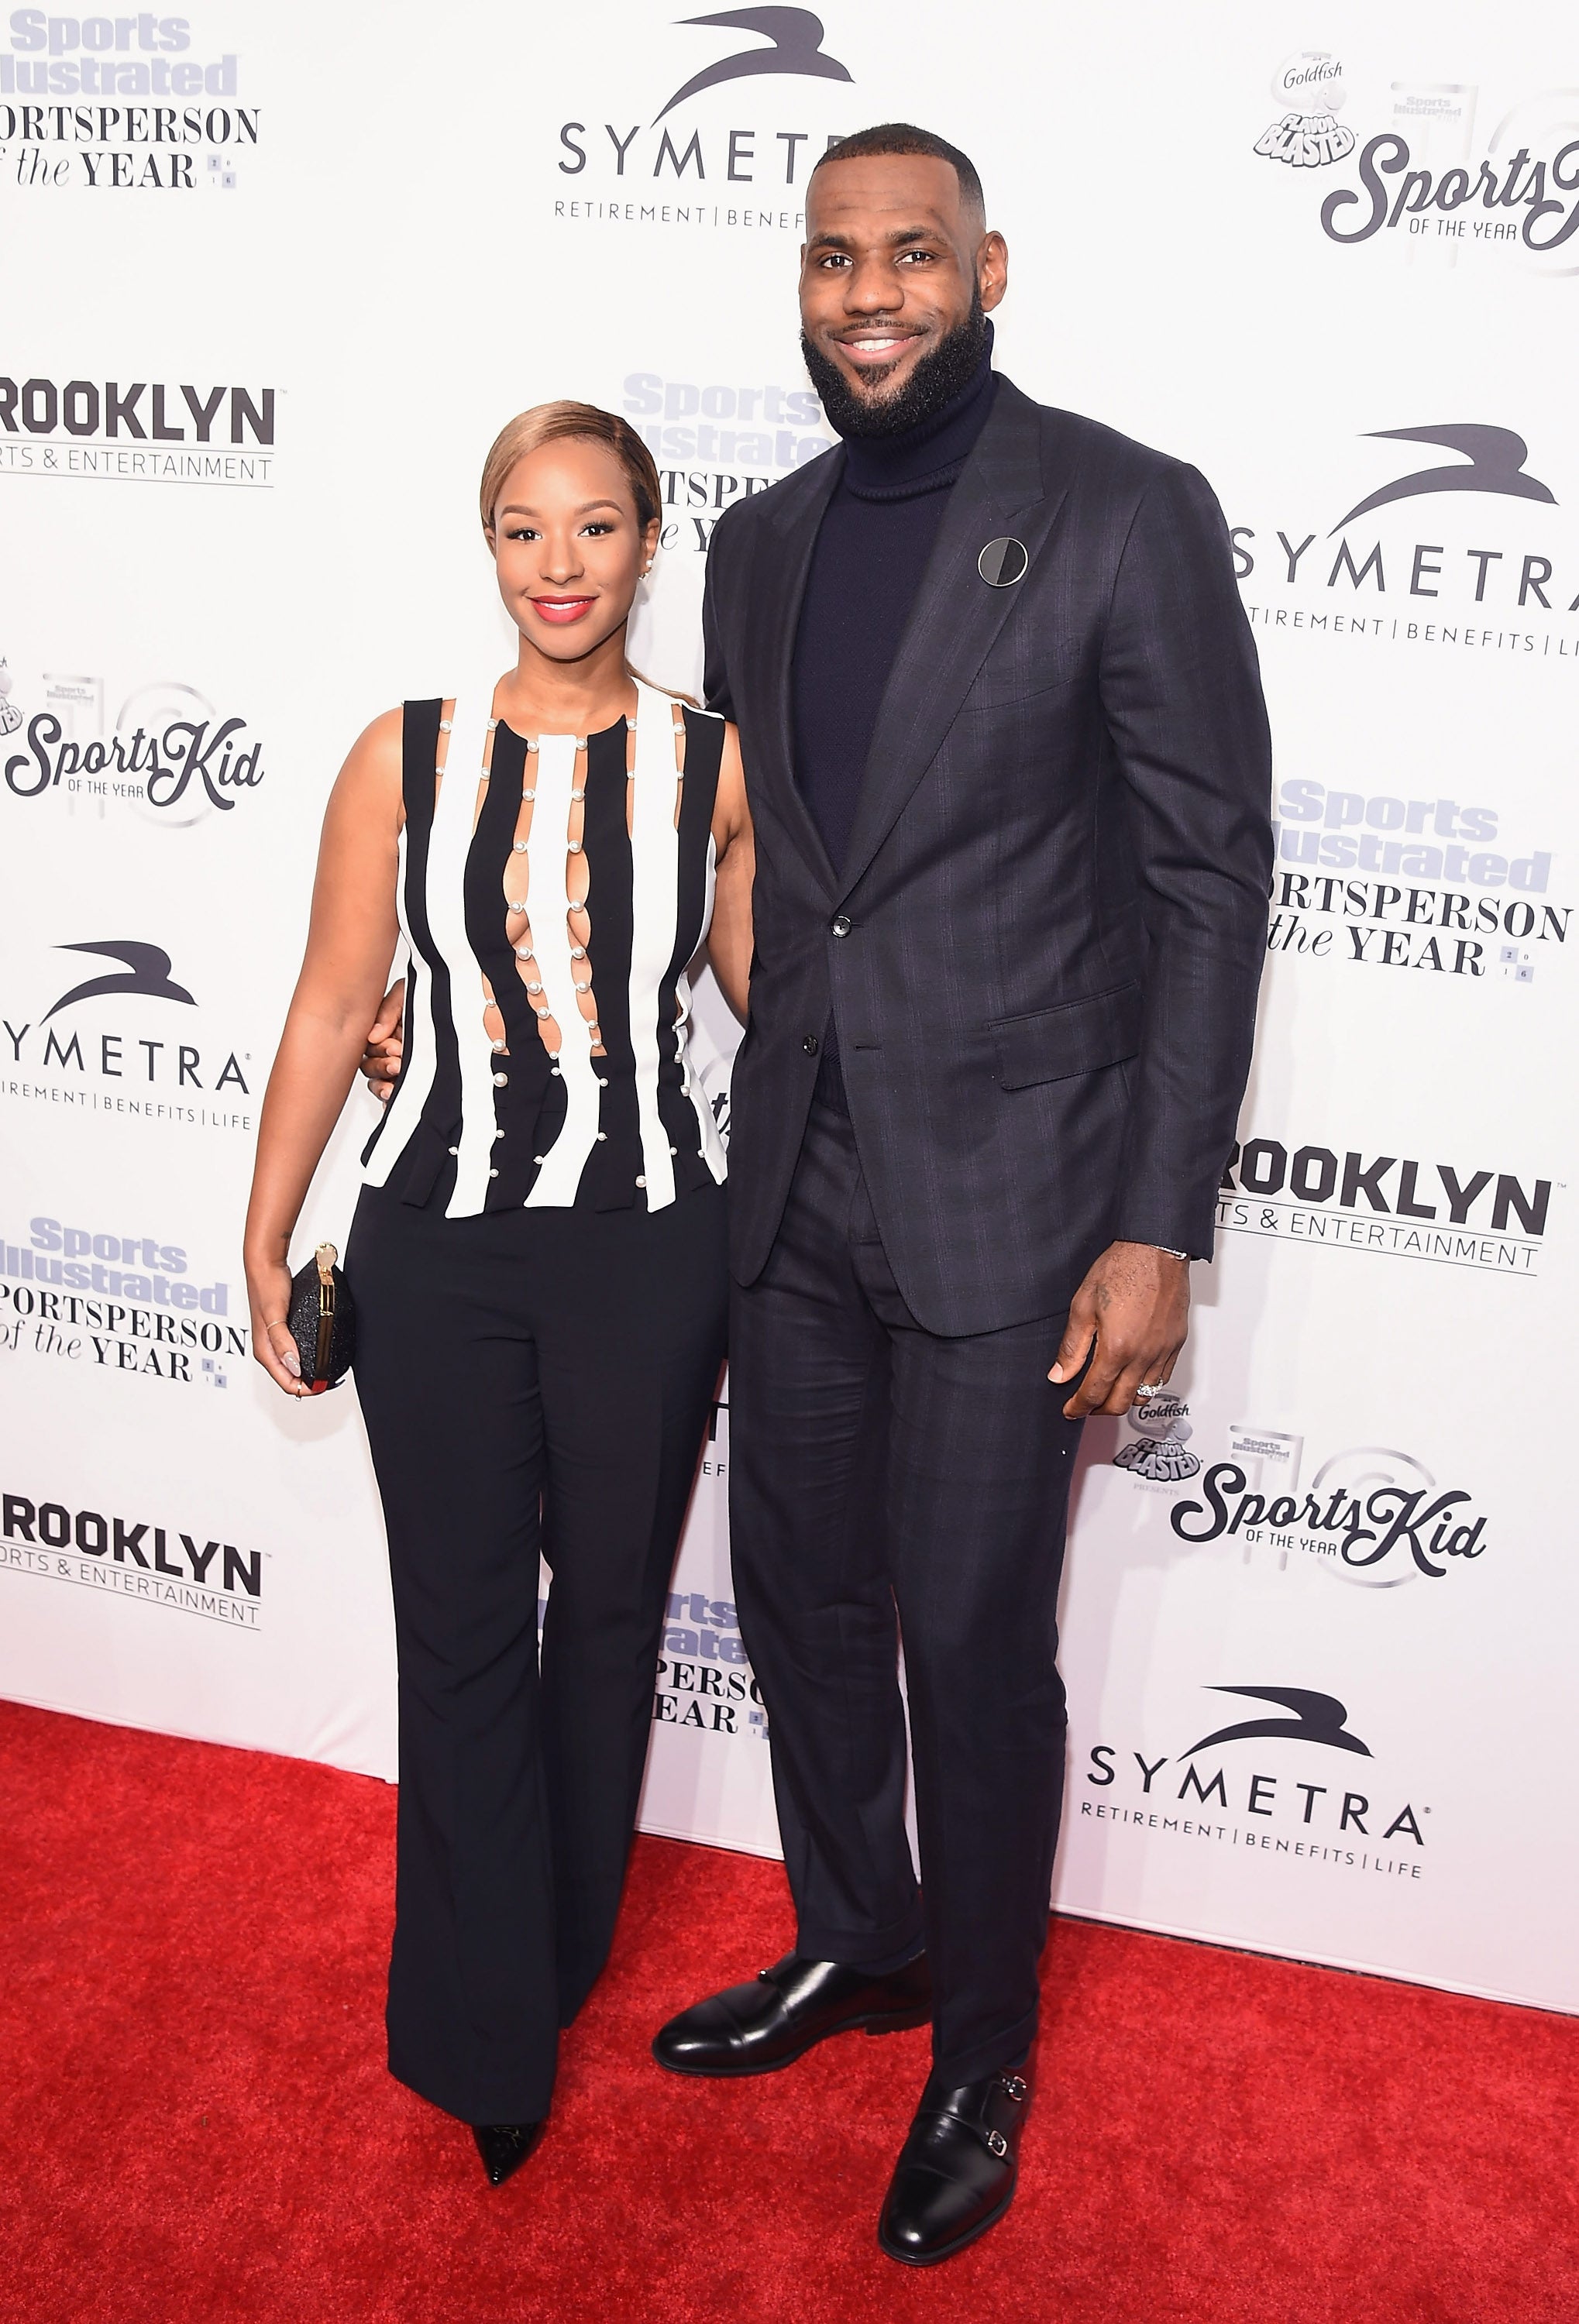 Black Love Is Beautiful 19 Famous Couples Who Make Forever Look Easy Essence 